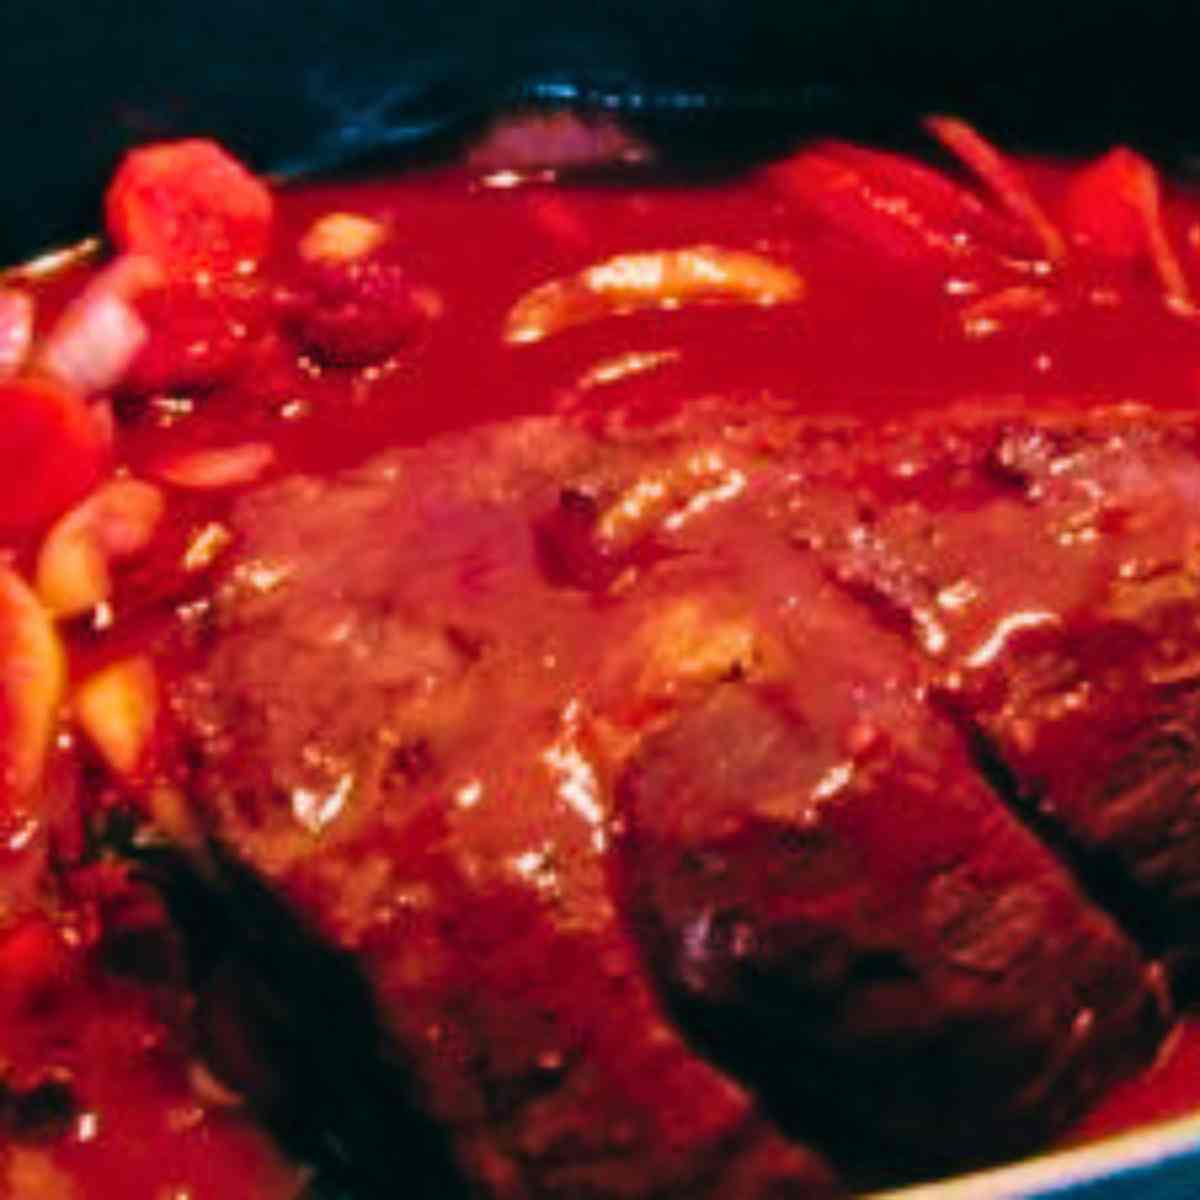 Large slab of red meat, carrots, celery, and onions covered in red tomato marinade.